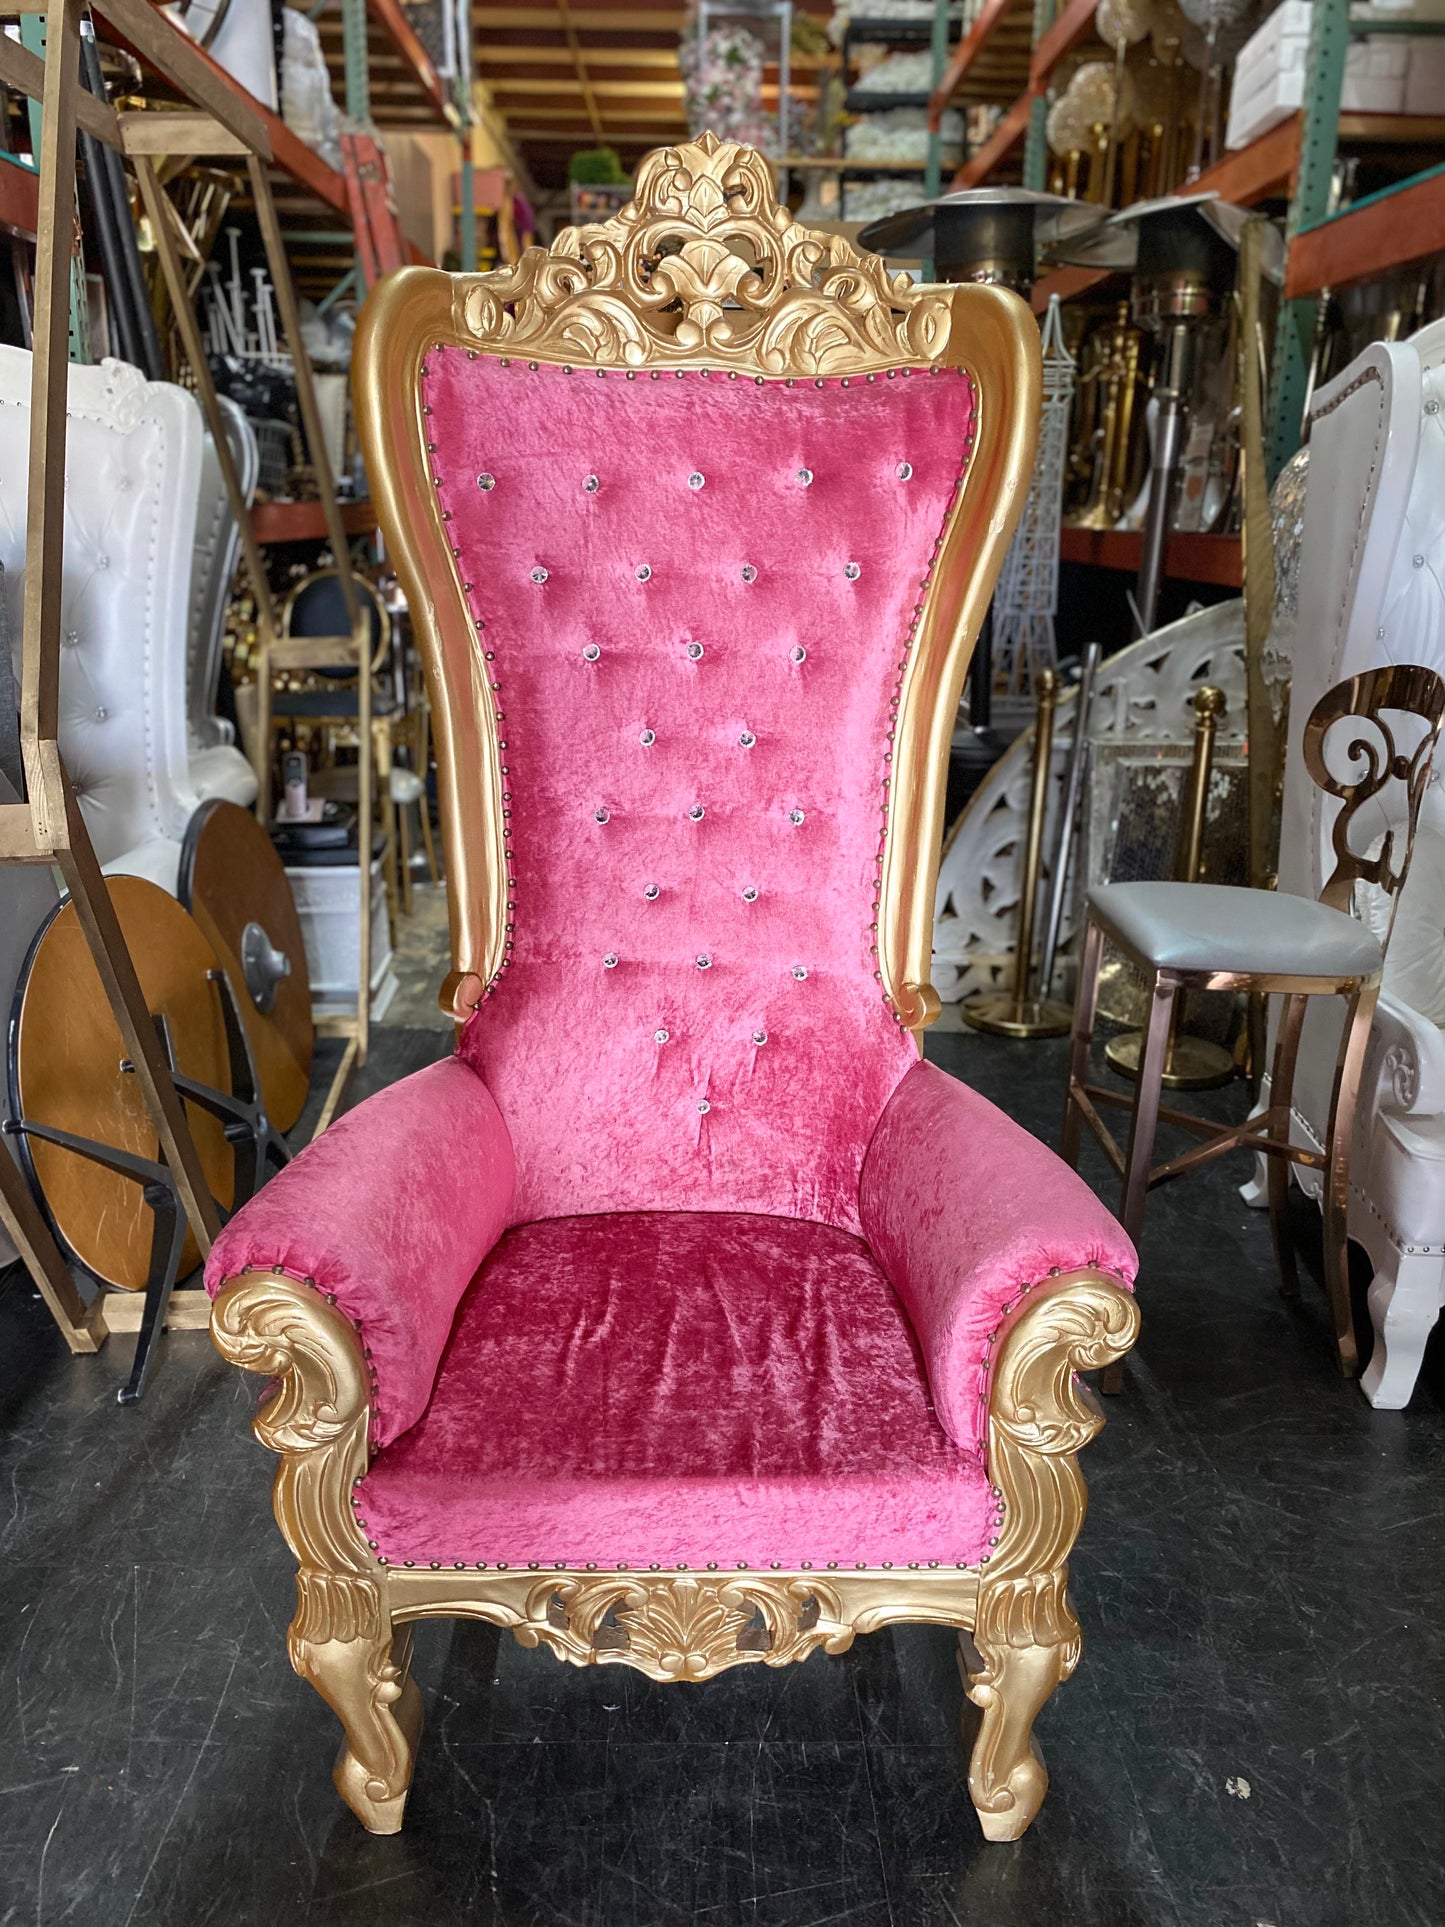 GATSBY CHAIR PINK AND GOLD